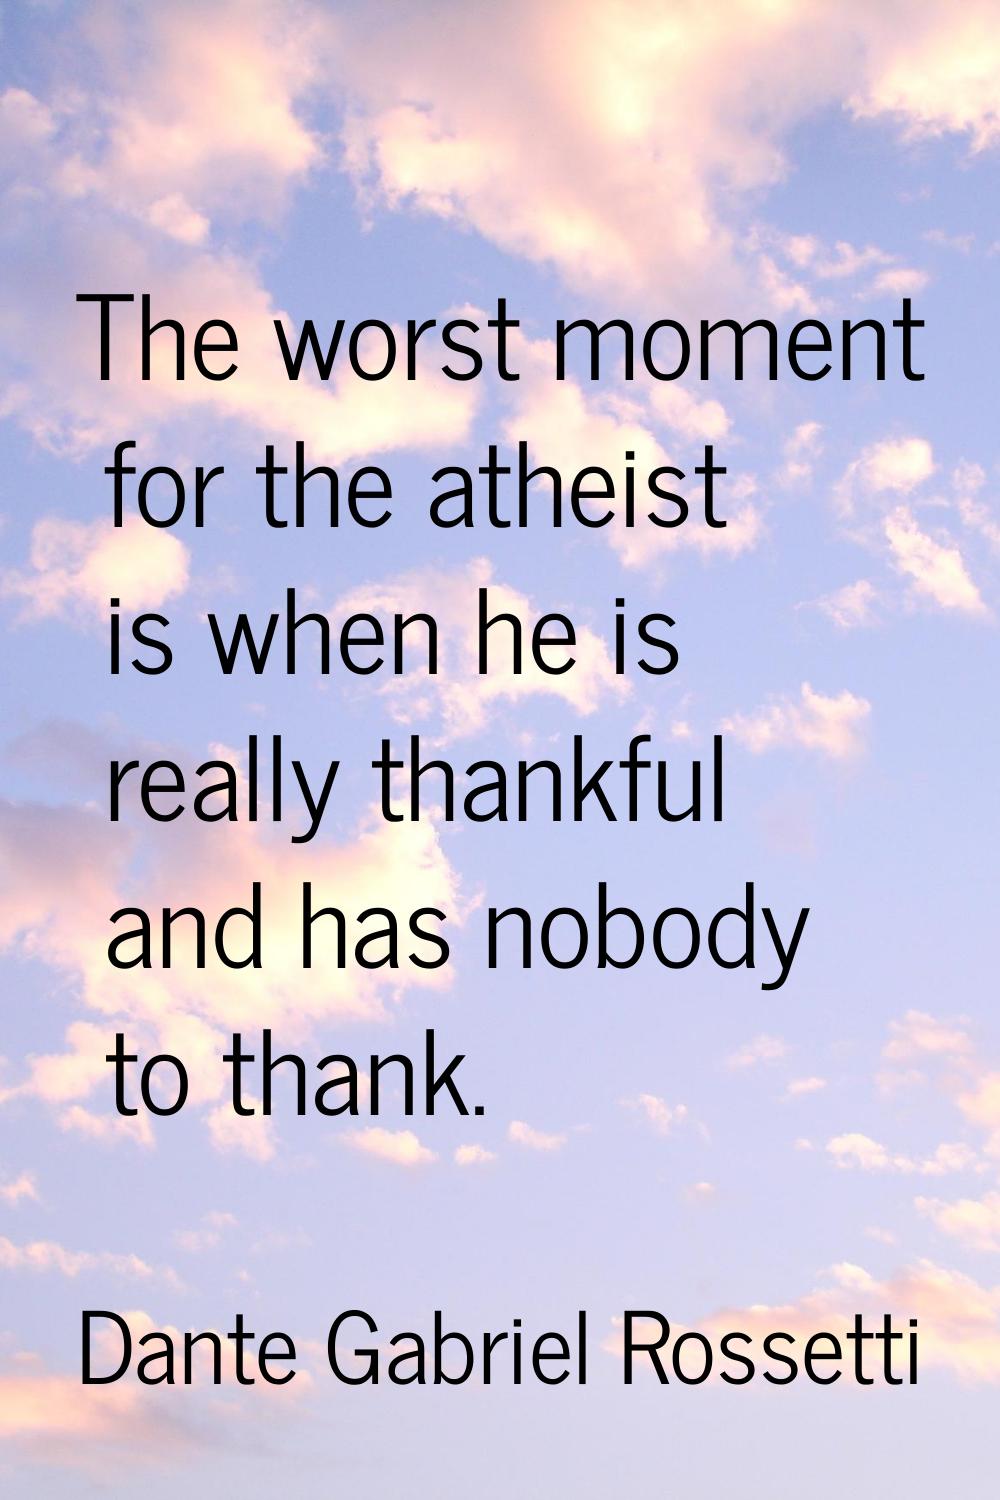 The worst moment for the atheist is when he is really thankful and has nobody to thank.